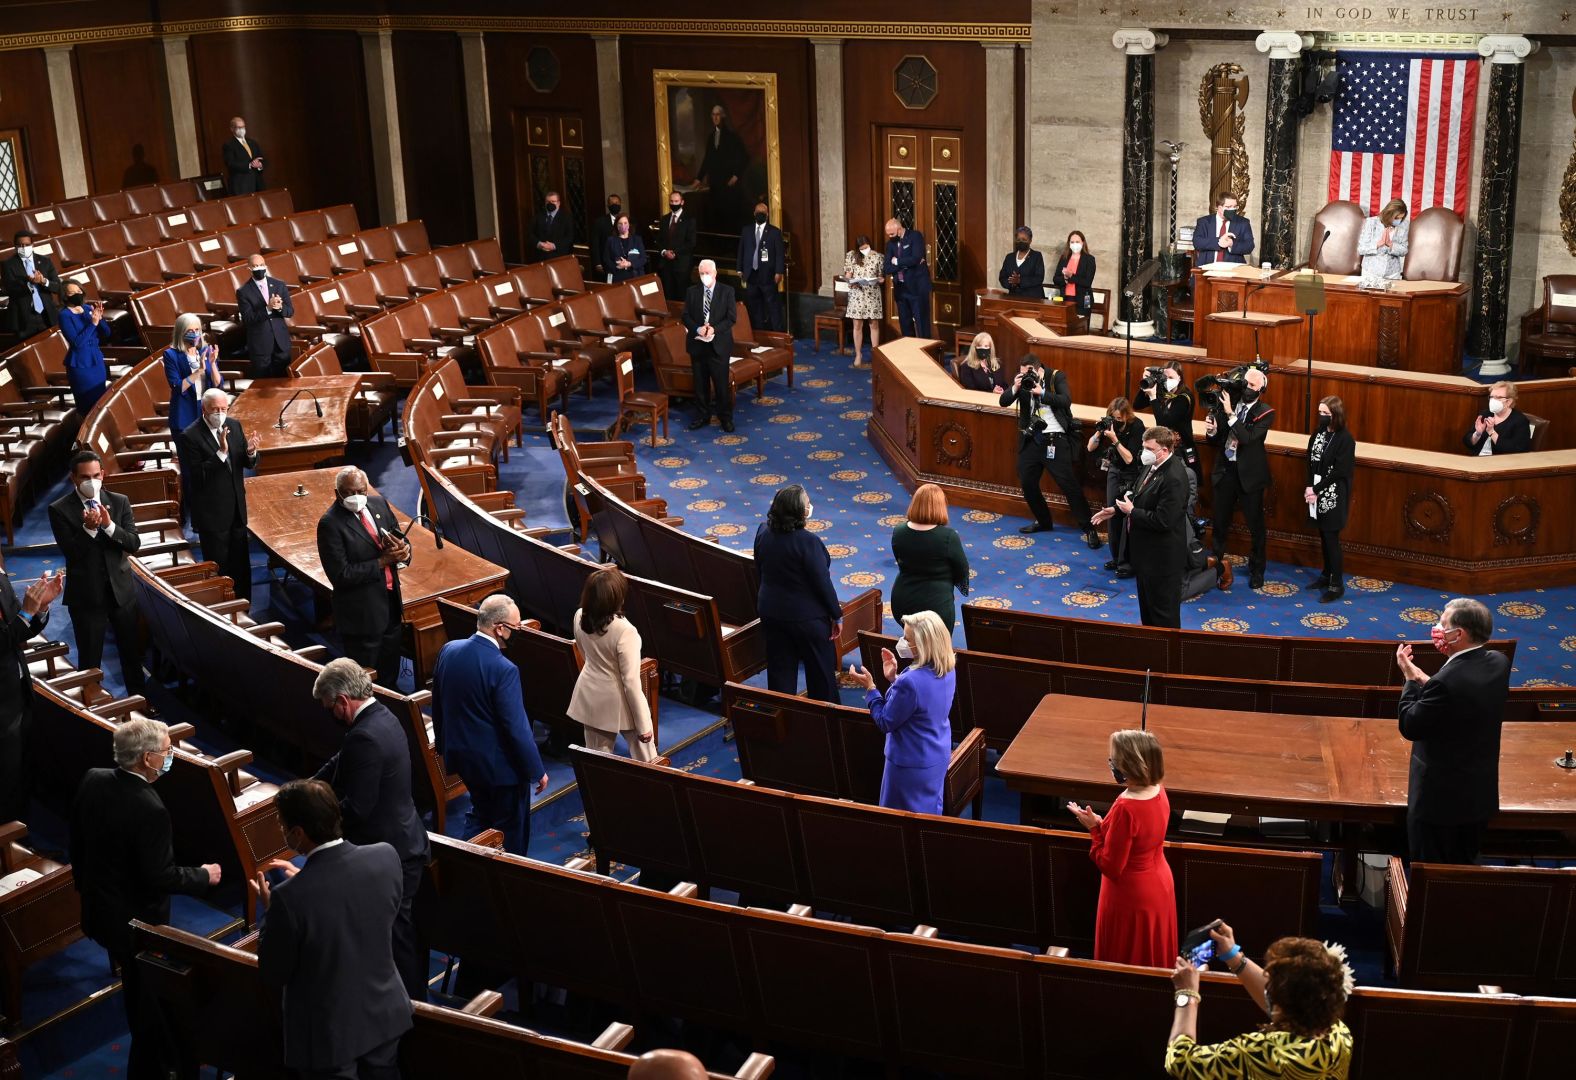 Members of Congress applaud as Harris walks into the House chamber.